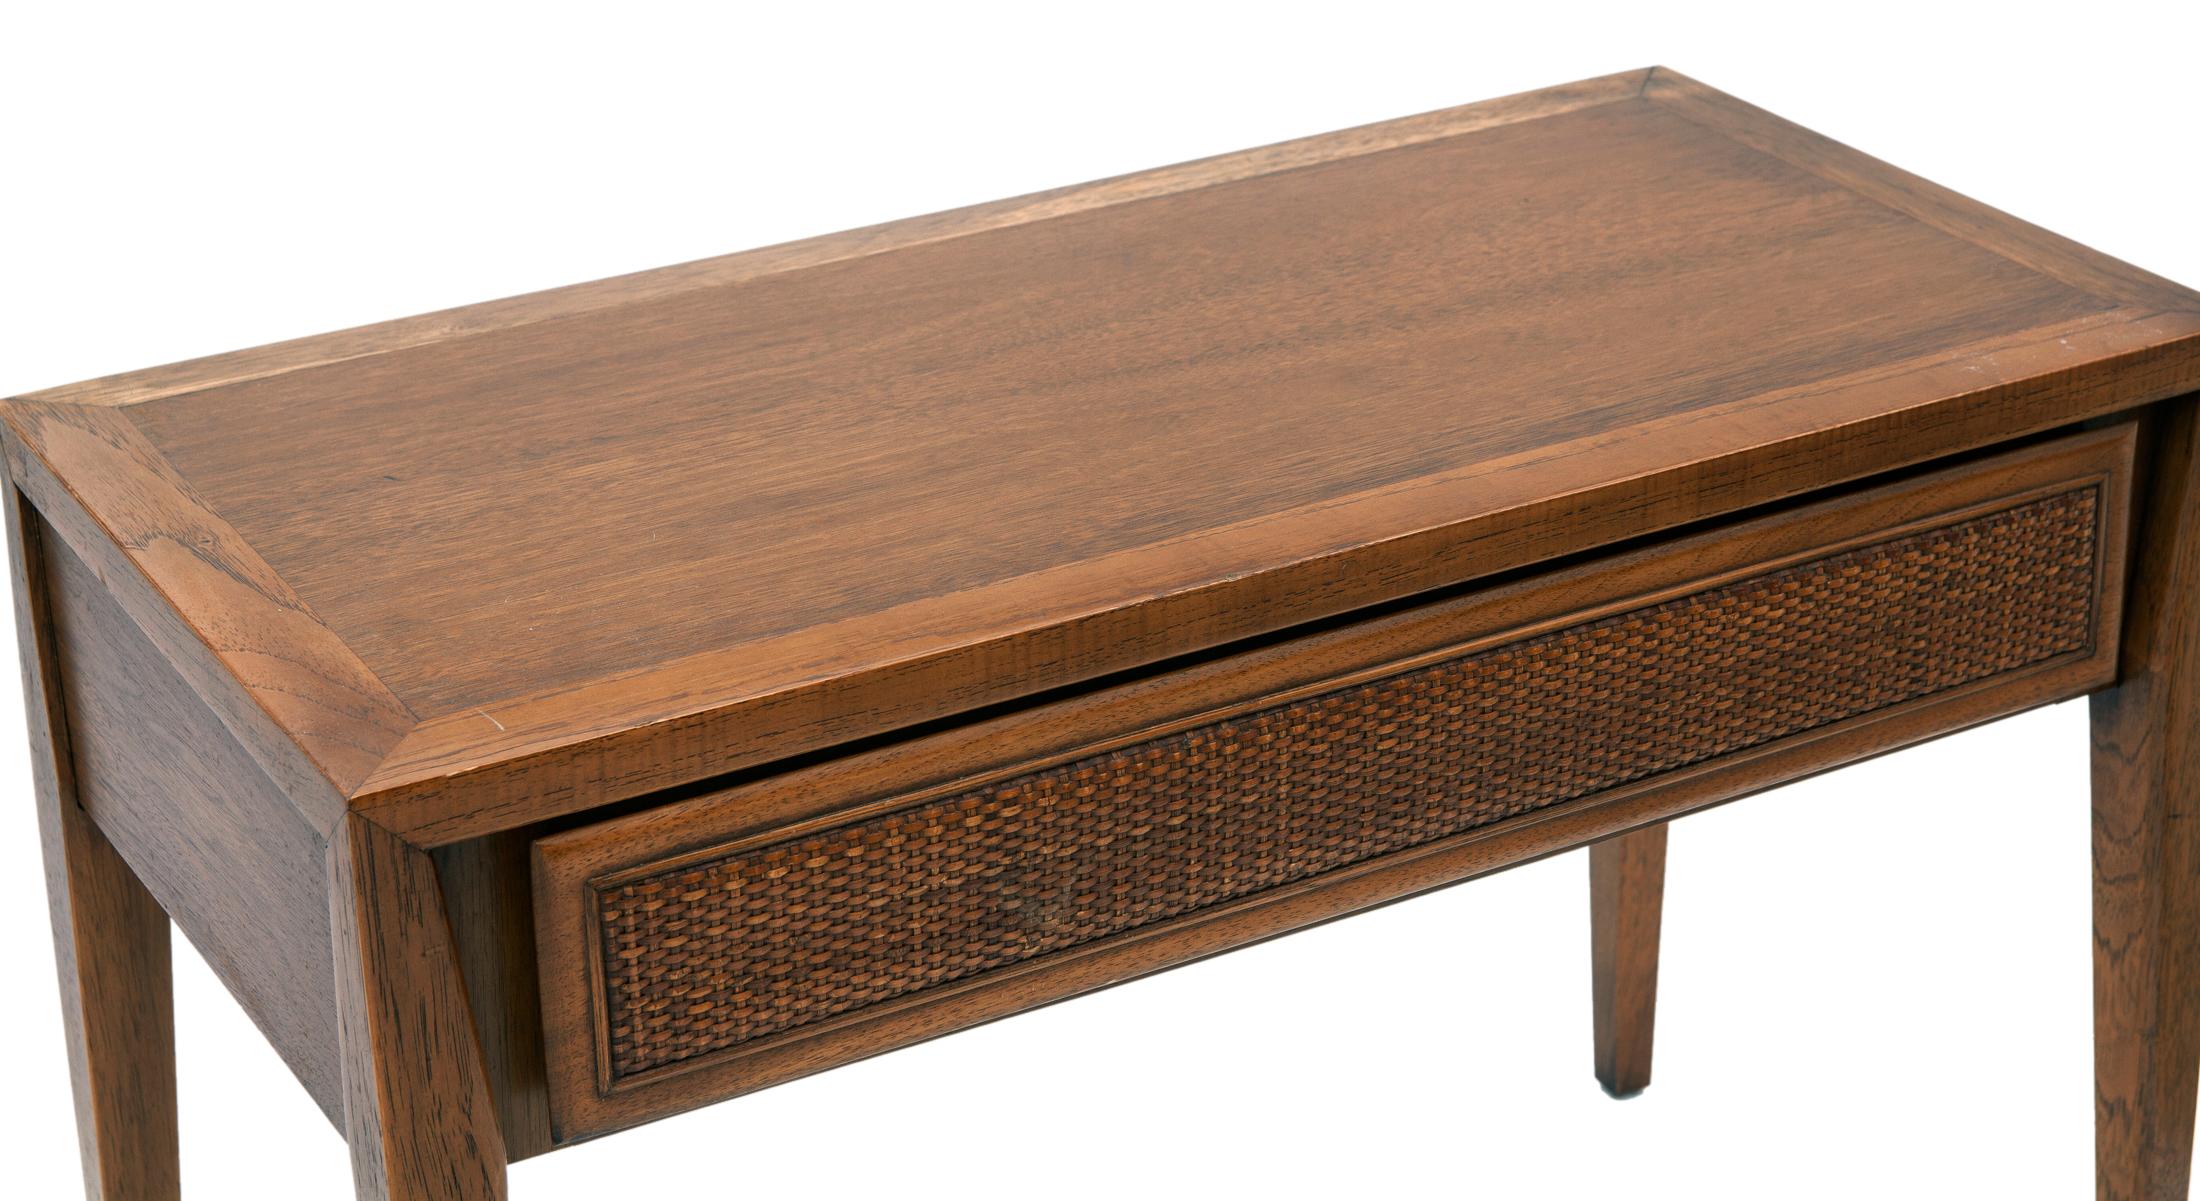 Midcentury Walnut Table with Wicker Drawer by Century For Sale 2